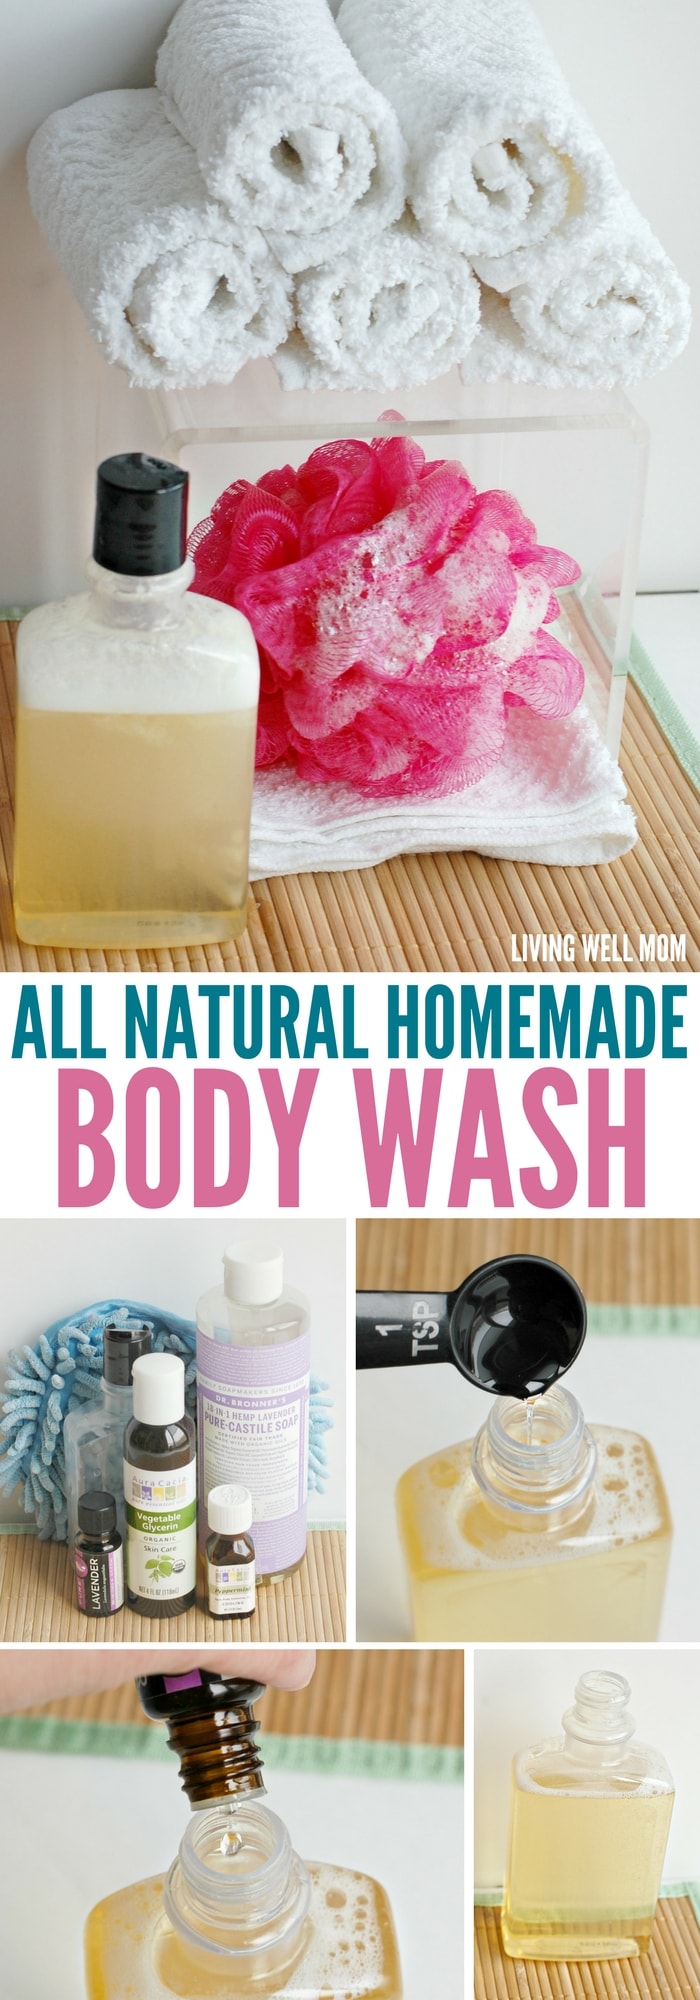 collage of images of pouring ingredients to make an all-natural homemade body wash